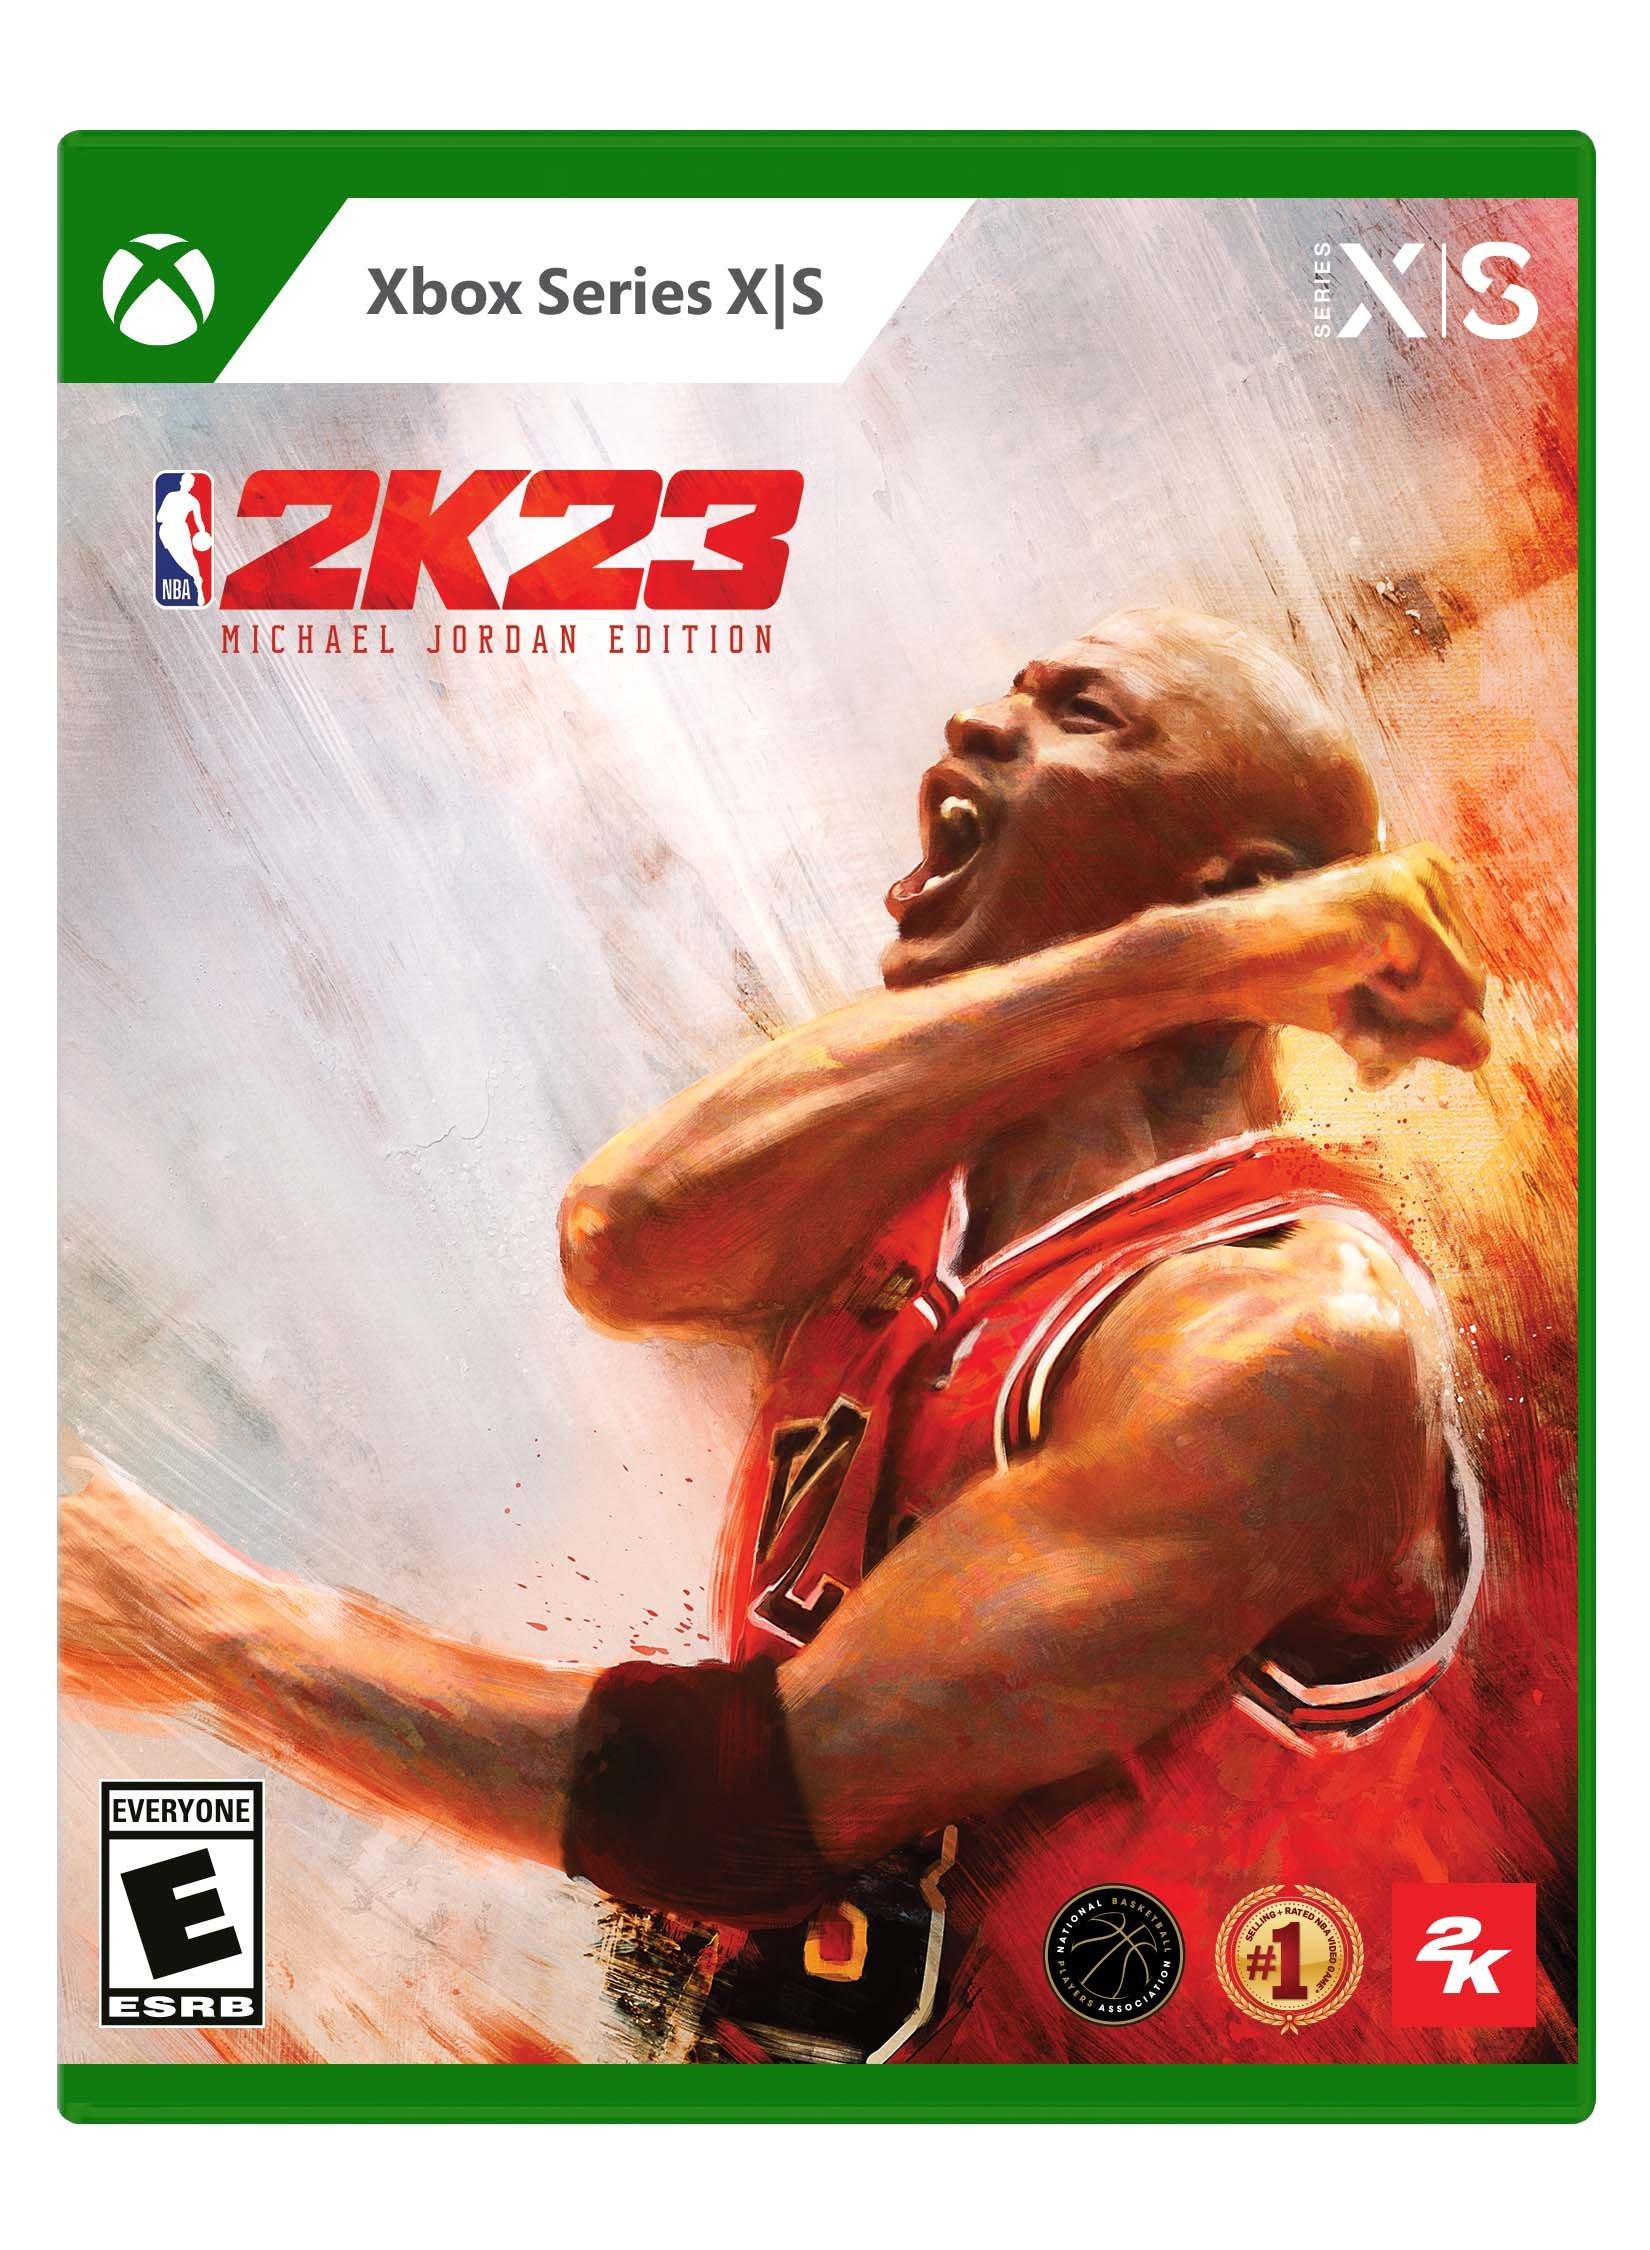 NBA 2K22 Is Now Available For Xbox One And Xbox Series X